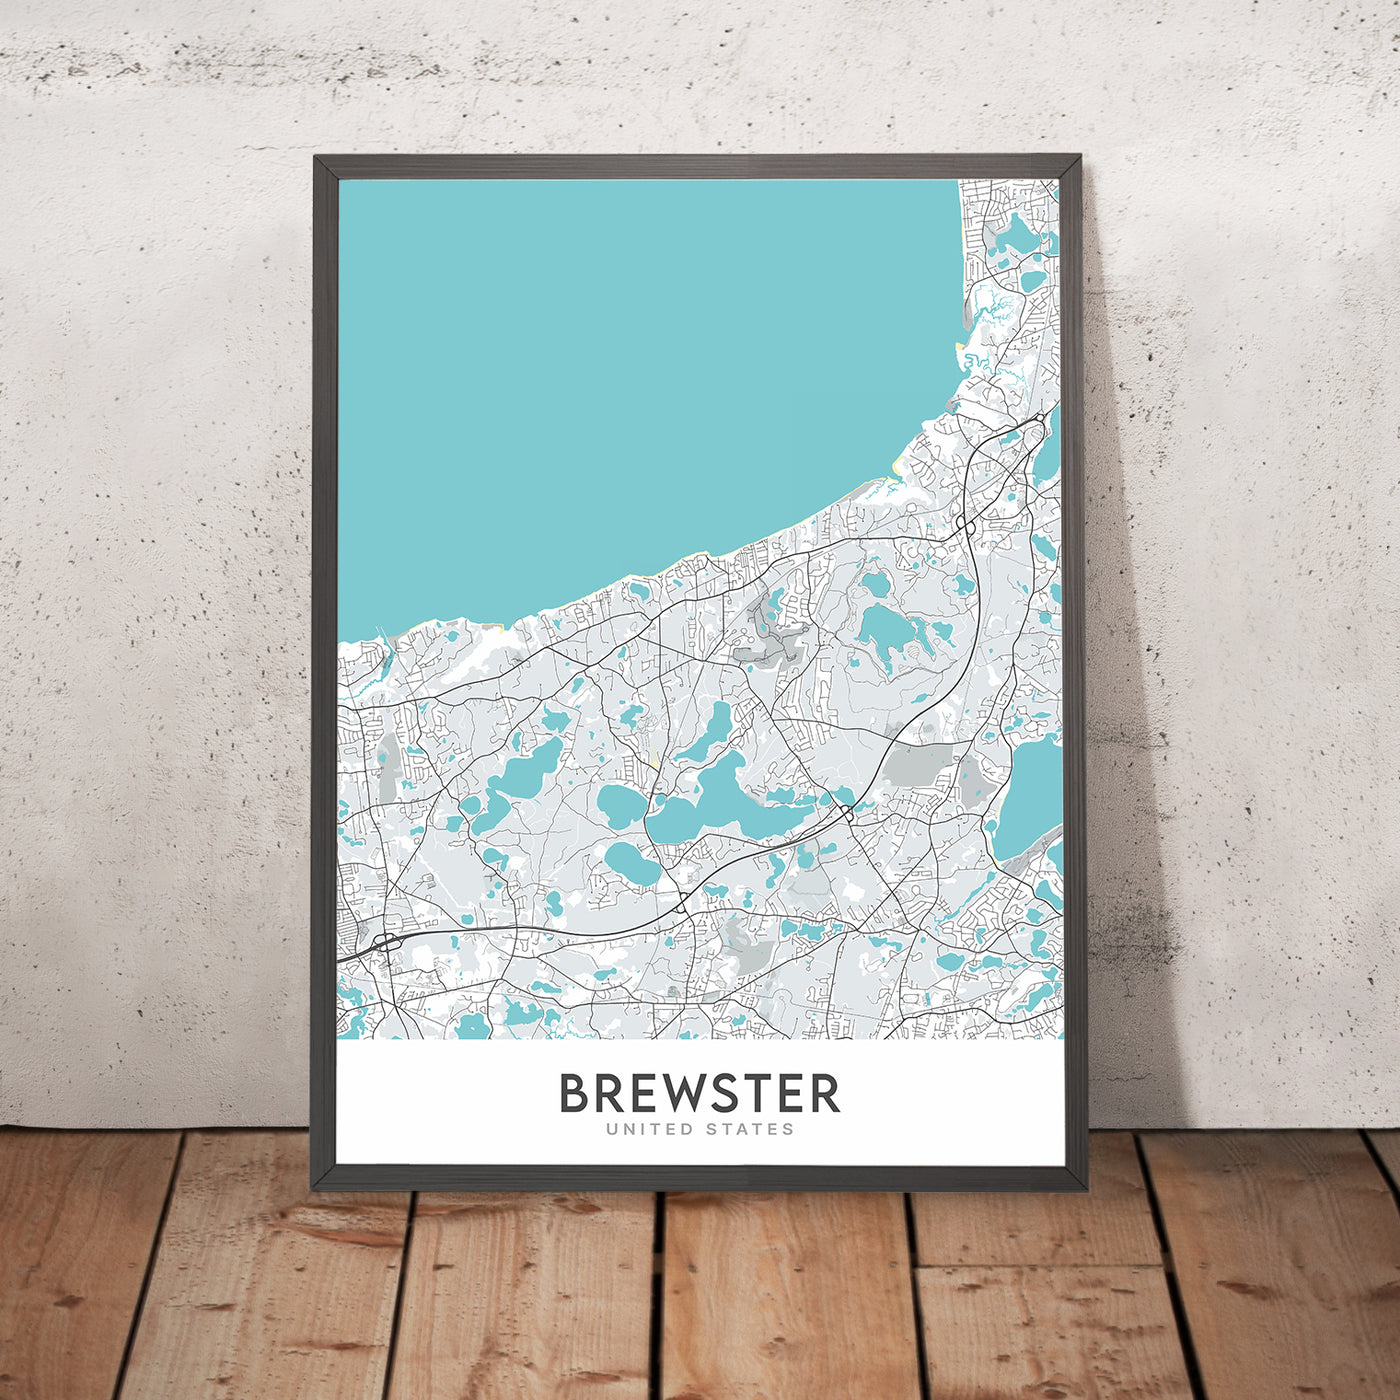 Modern City Map of Brewster, MA: Cape Cod National Seashore, Nickerson State Park, Route 6A, Route 28, Scargo Lake